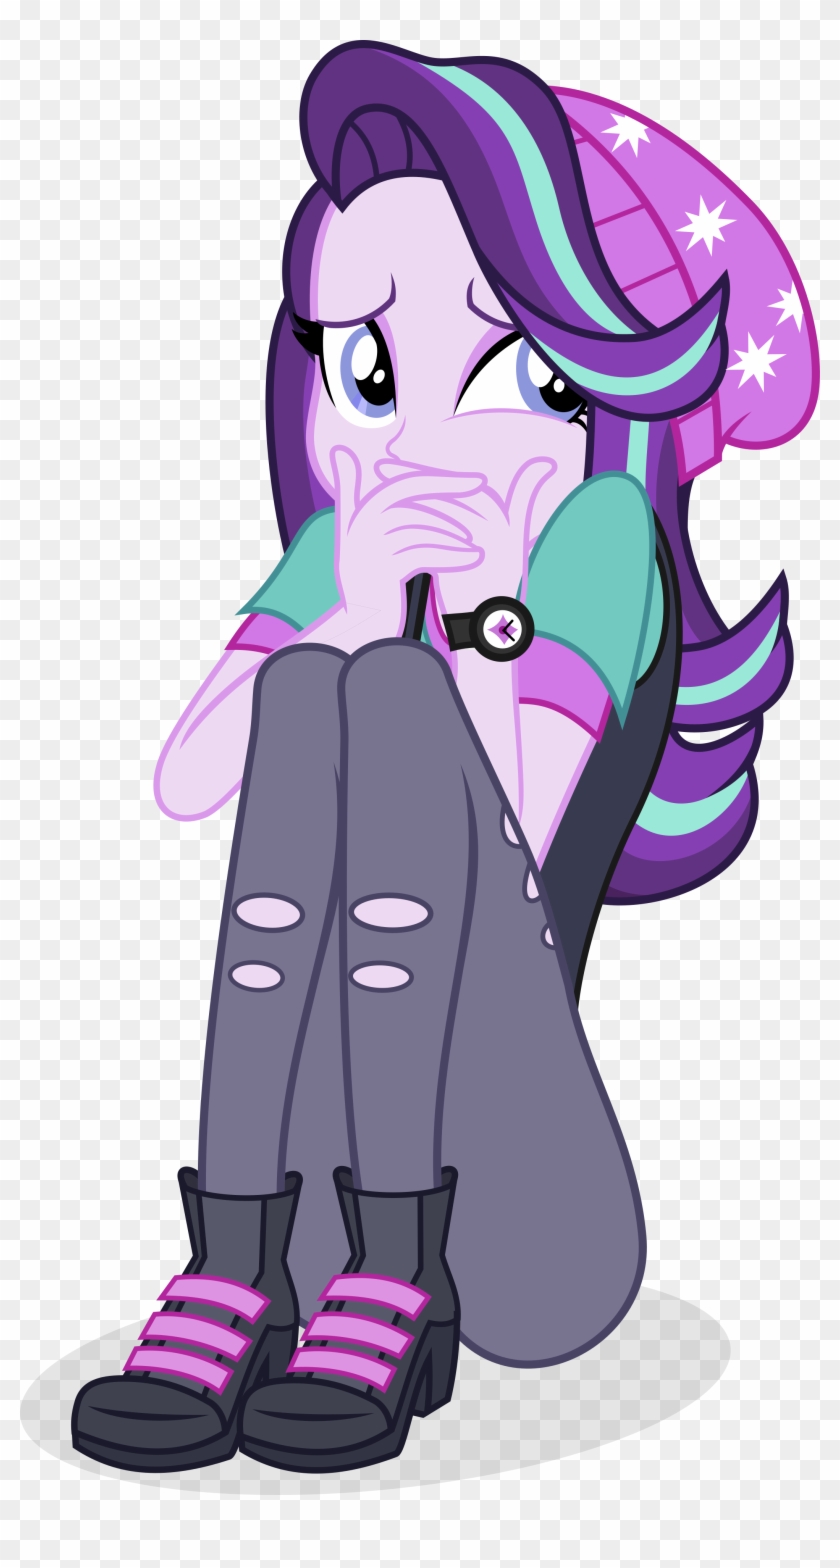 Starlight Scared By Punzil504 Starlight Scared By Punzil504 - Starlight Glimmer Eg Png #1301911